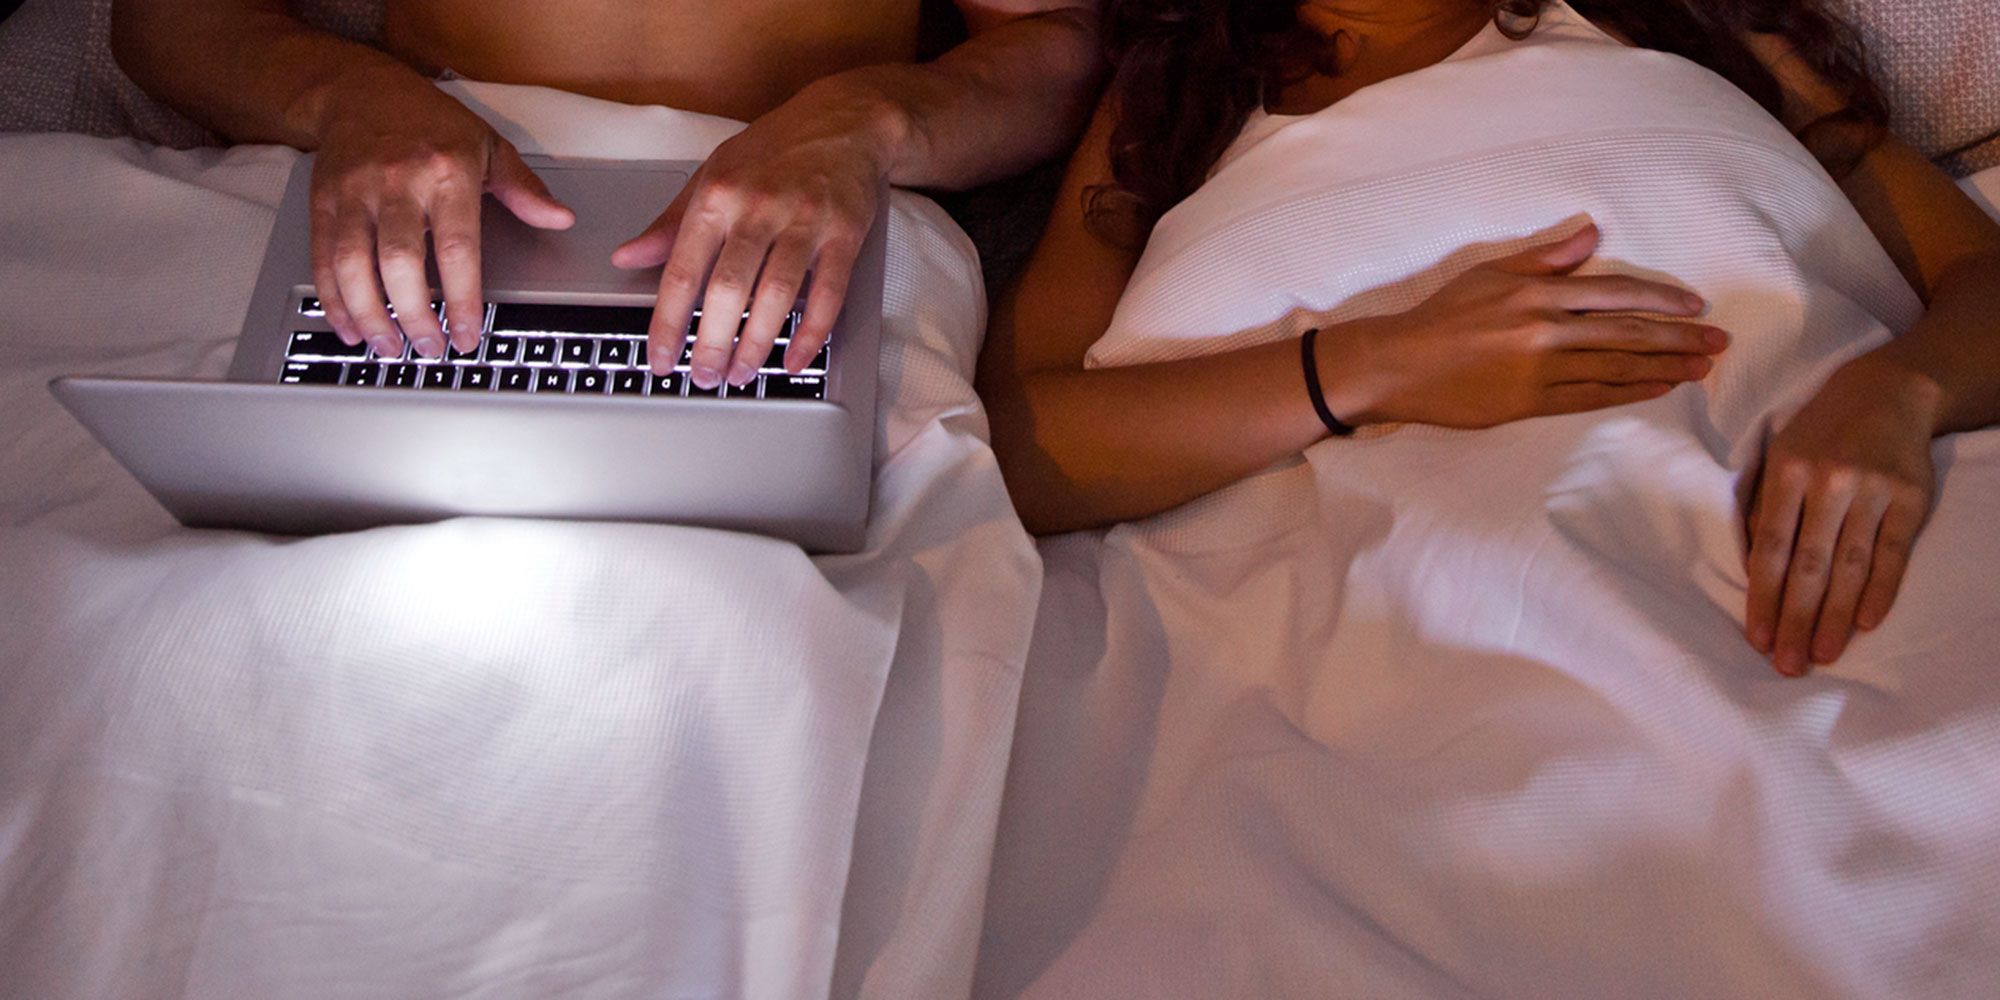 Watching porn together Why couples watch porn picture